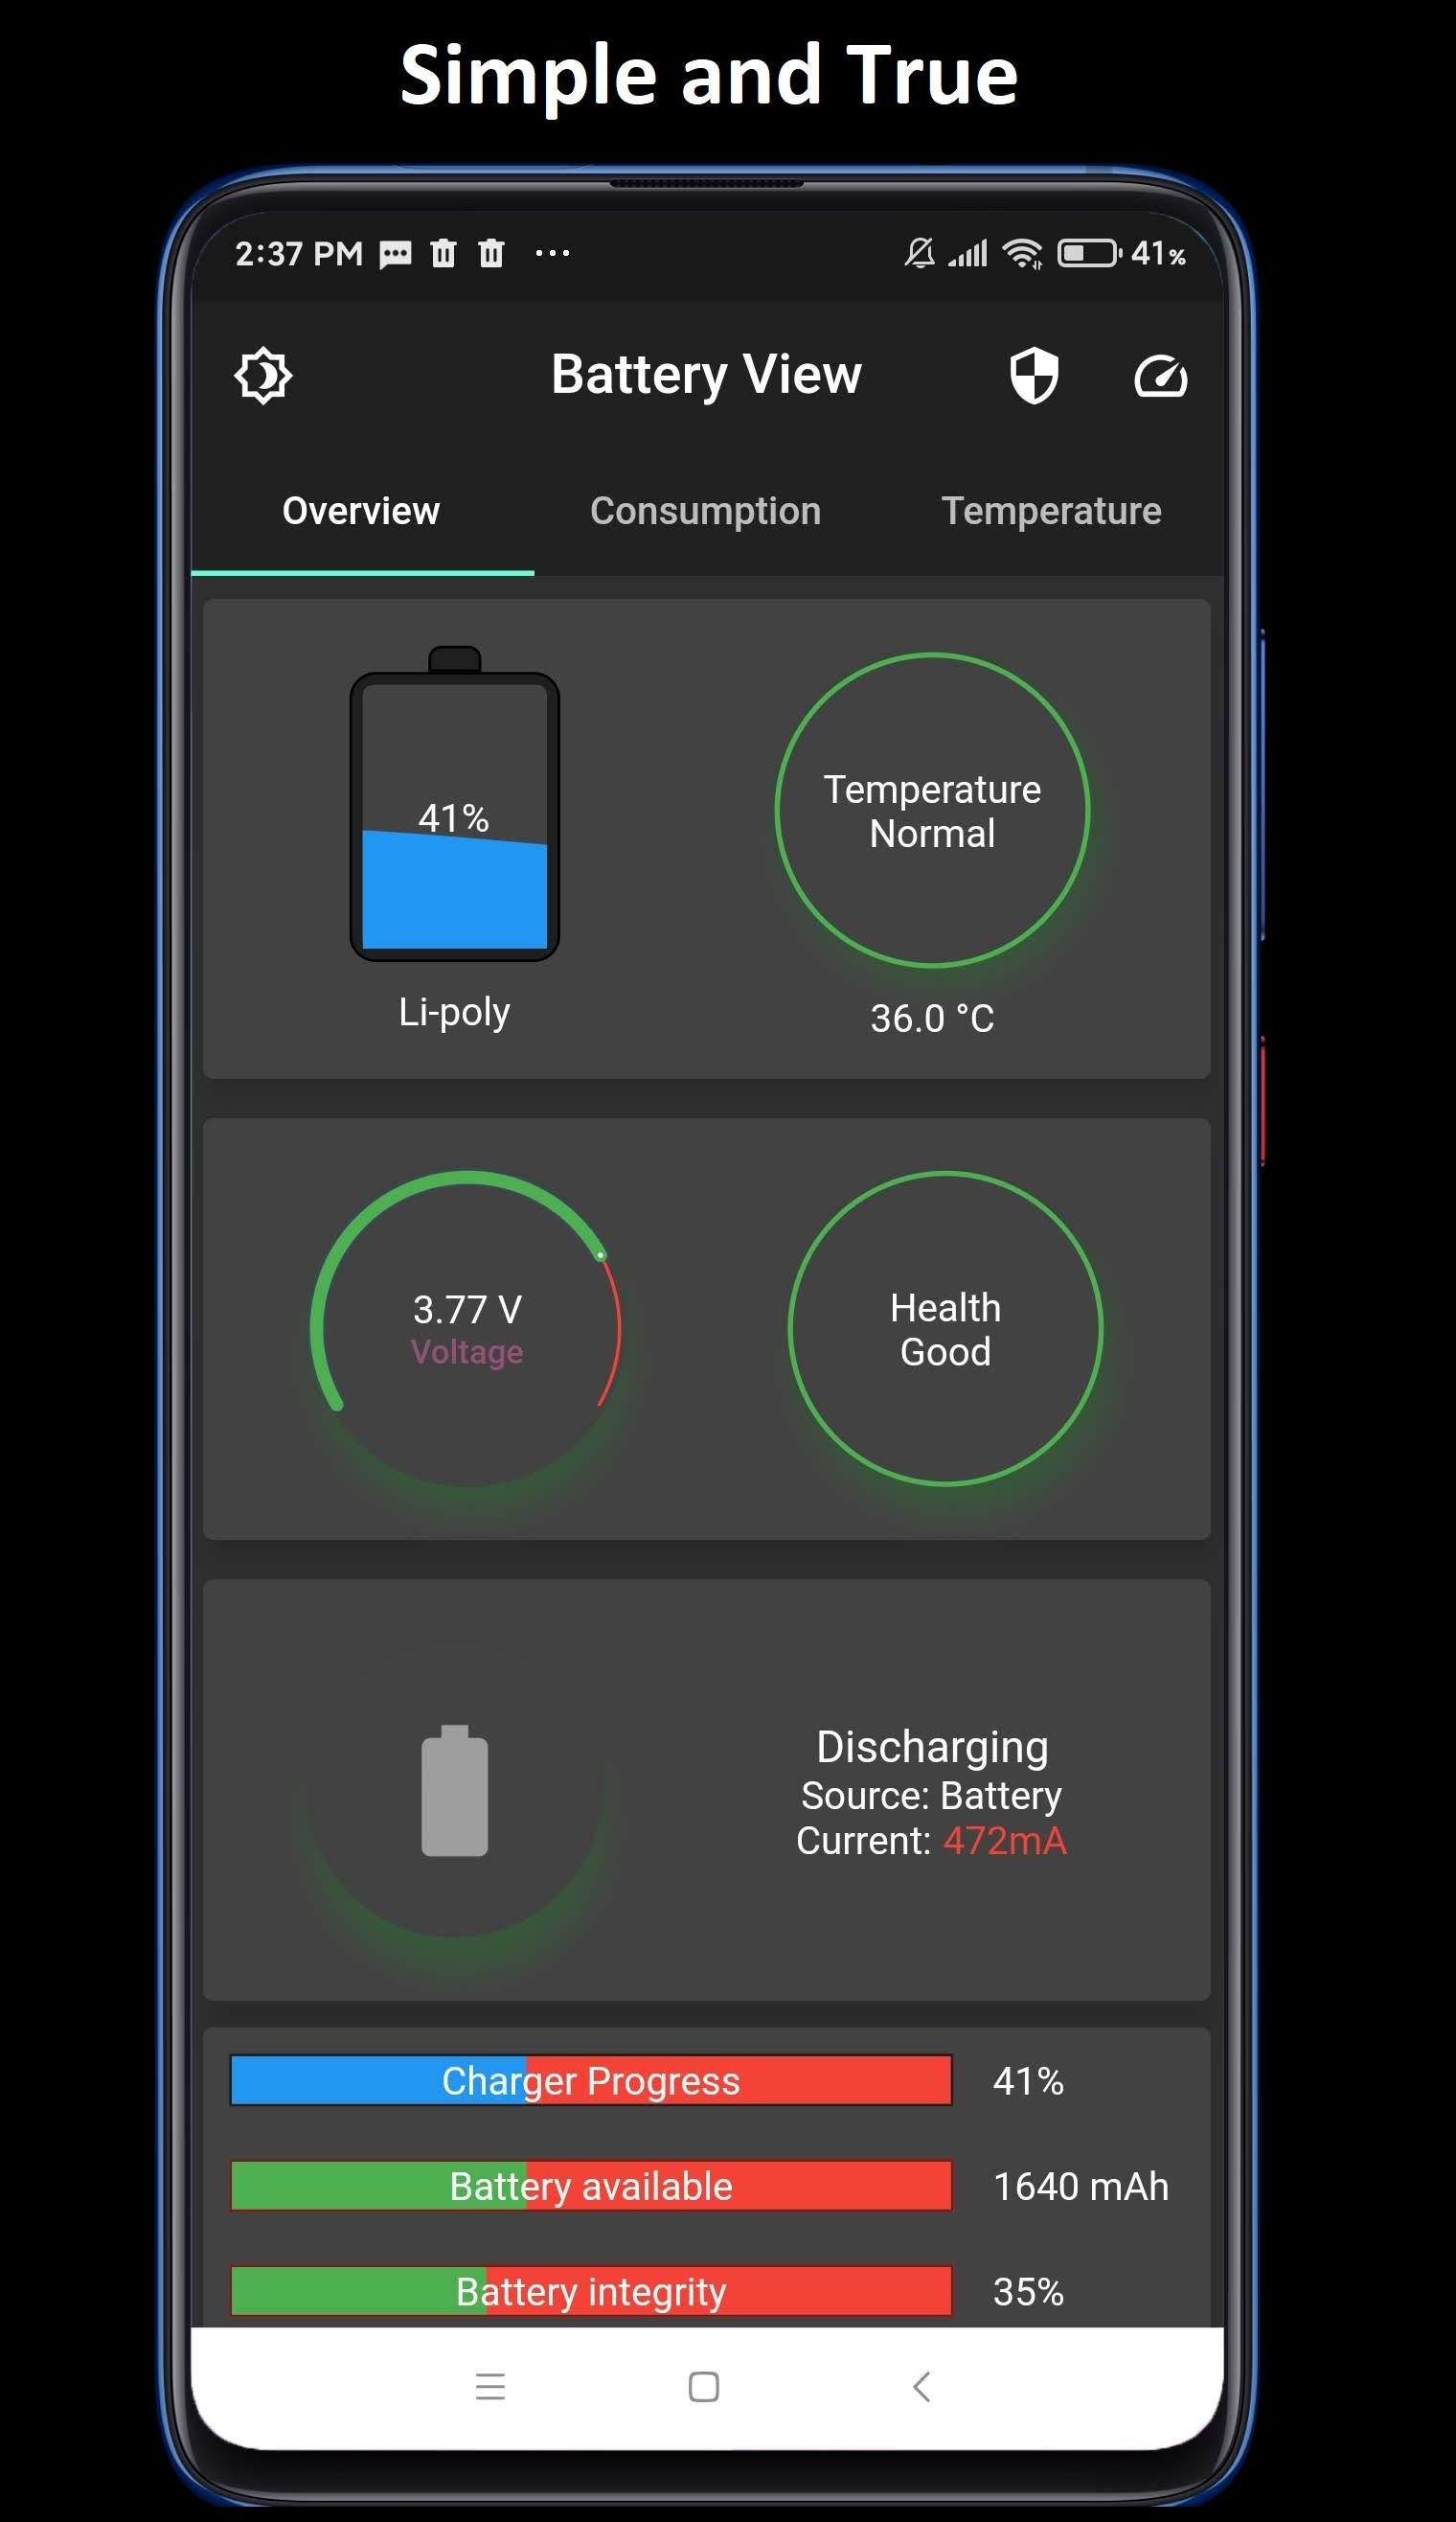 Battery view. Android Battery. Батарея андроид 8к. Андроид батарея 6000.